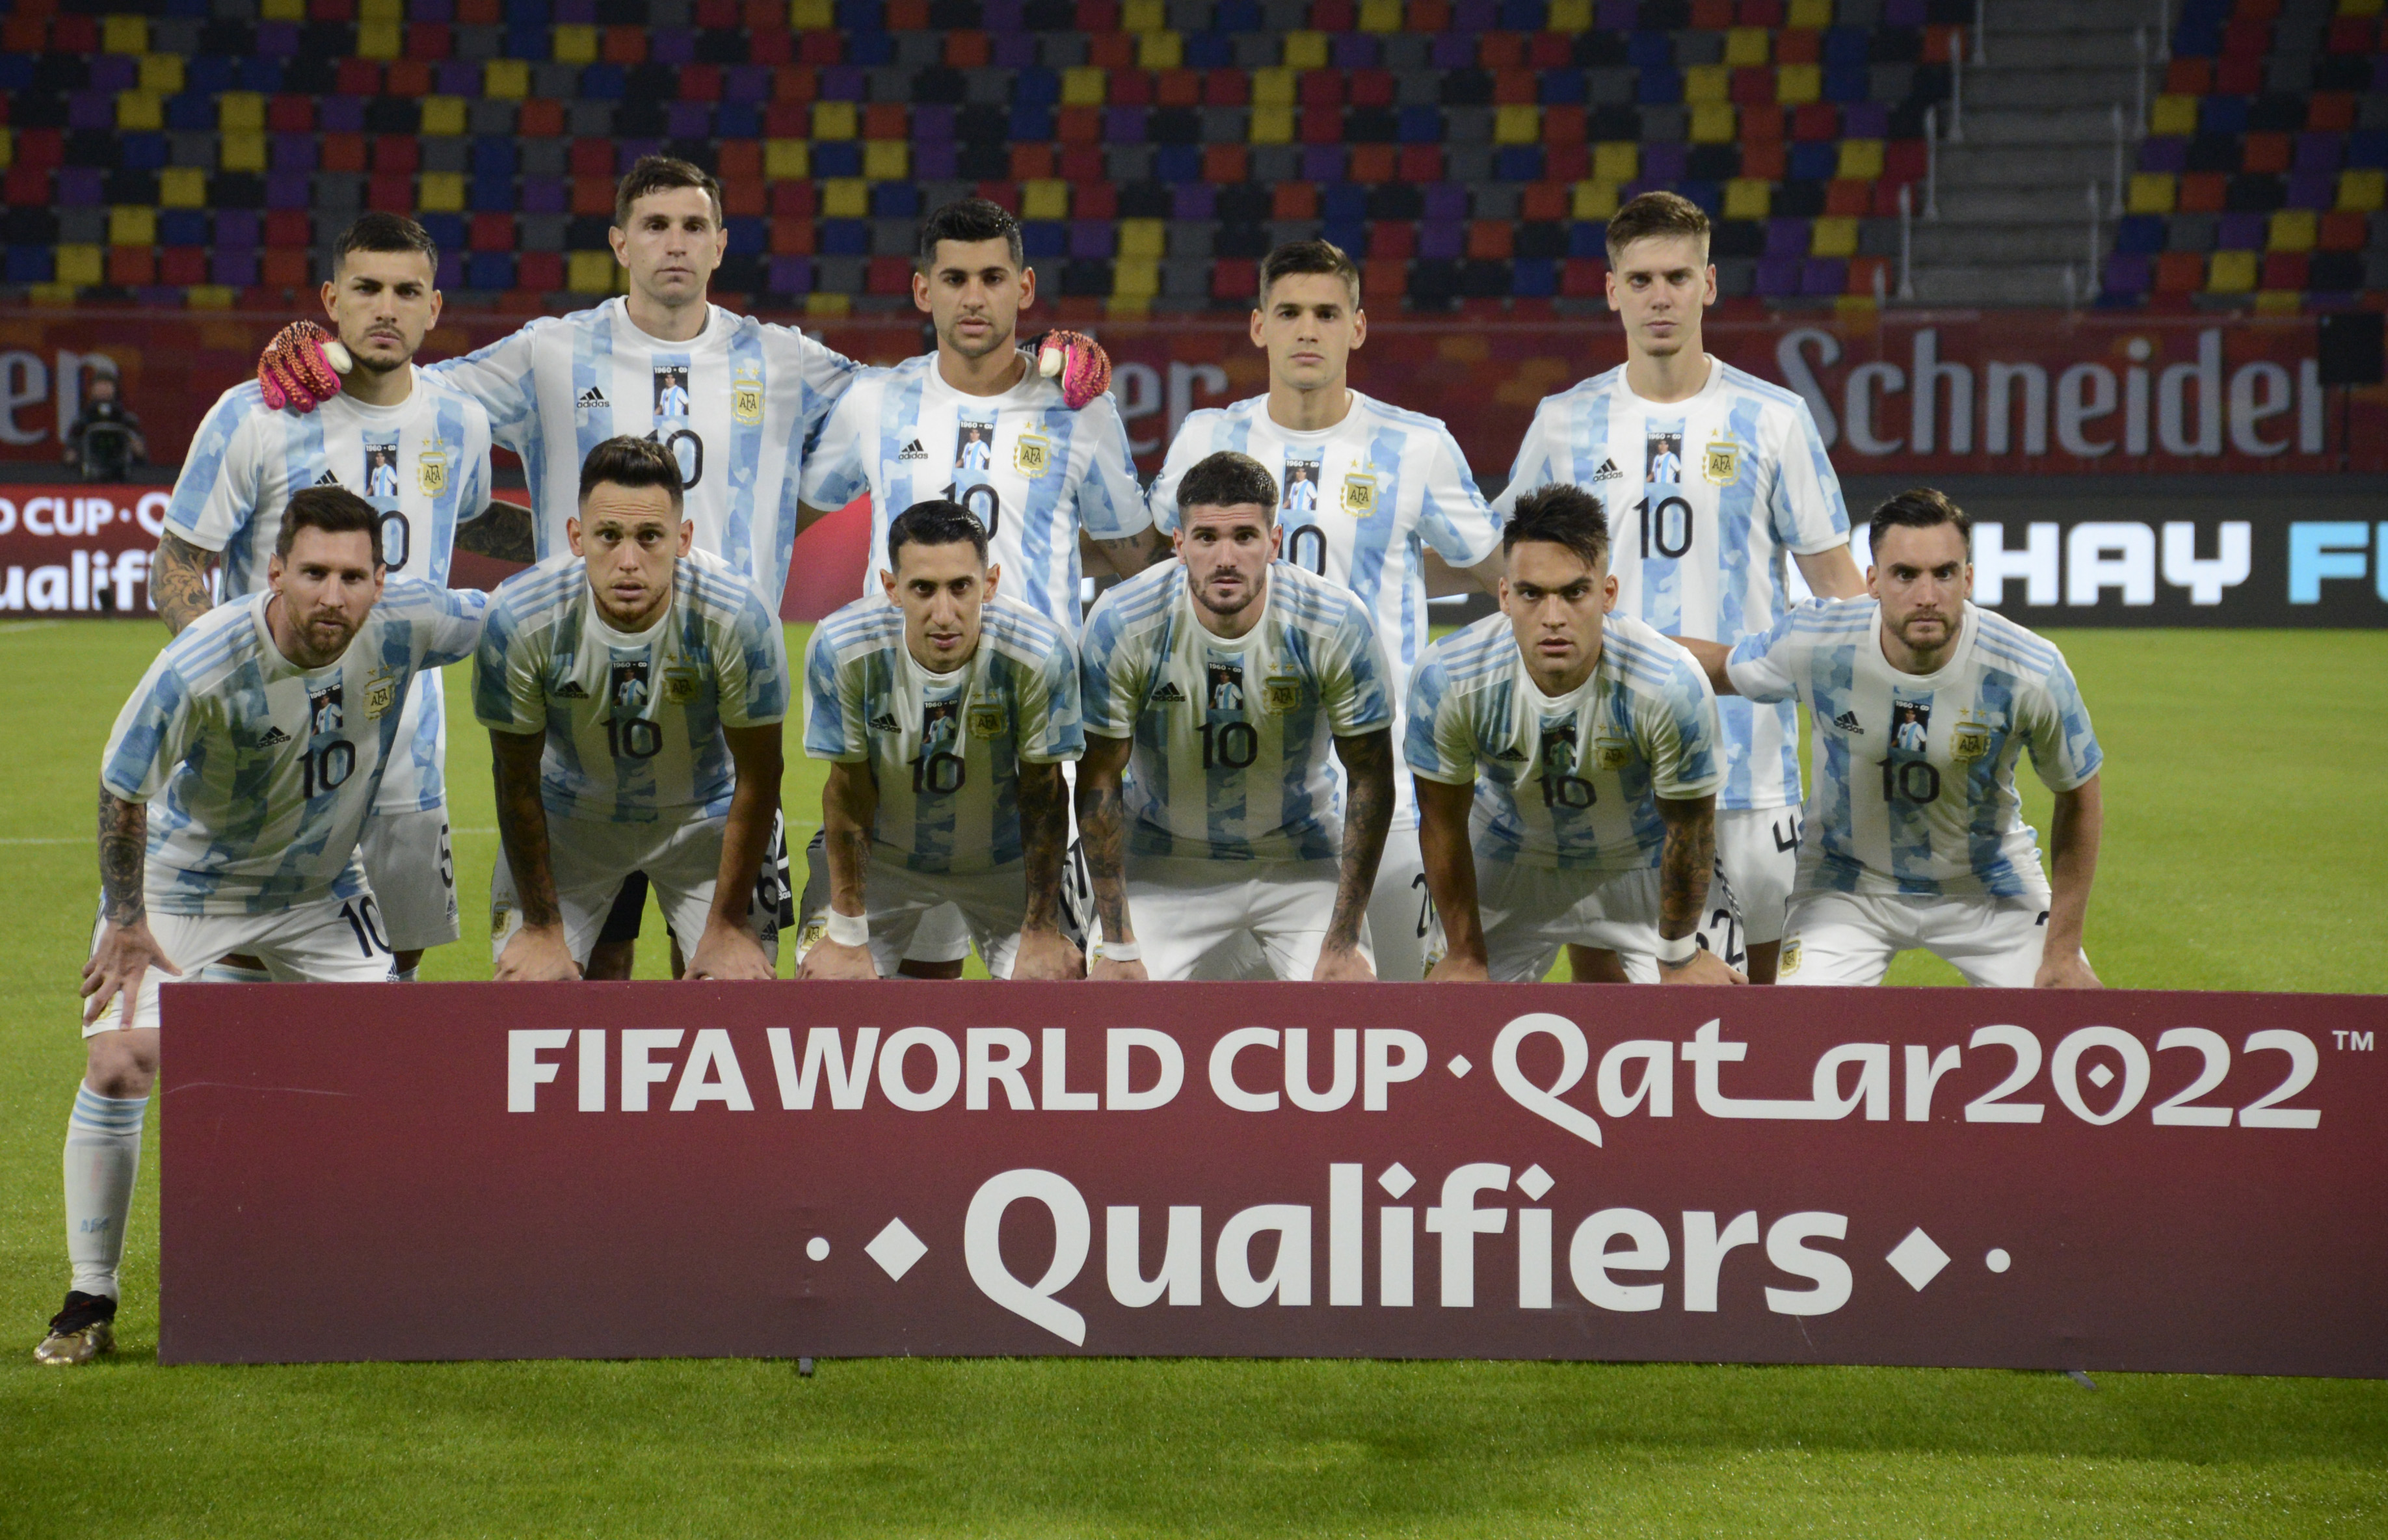 Argentina to play Copa America 2021 despite Brazil being named new hosts